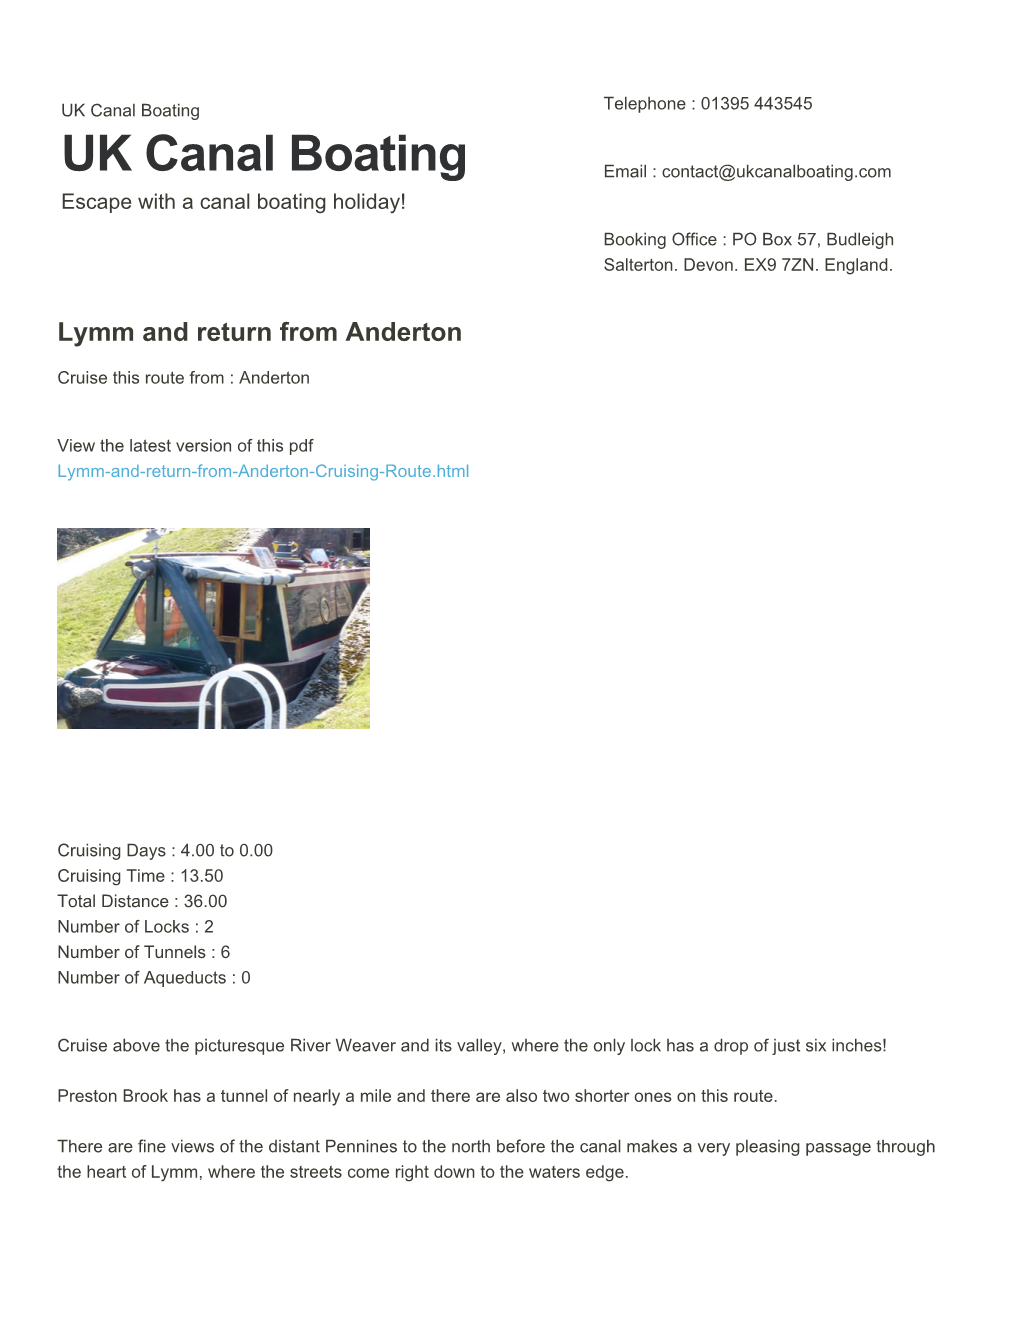 Lymm and Return from Anderton | UK Canal Boating